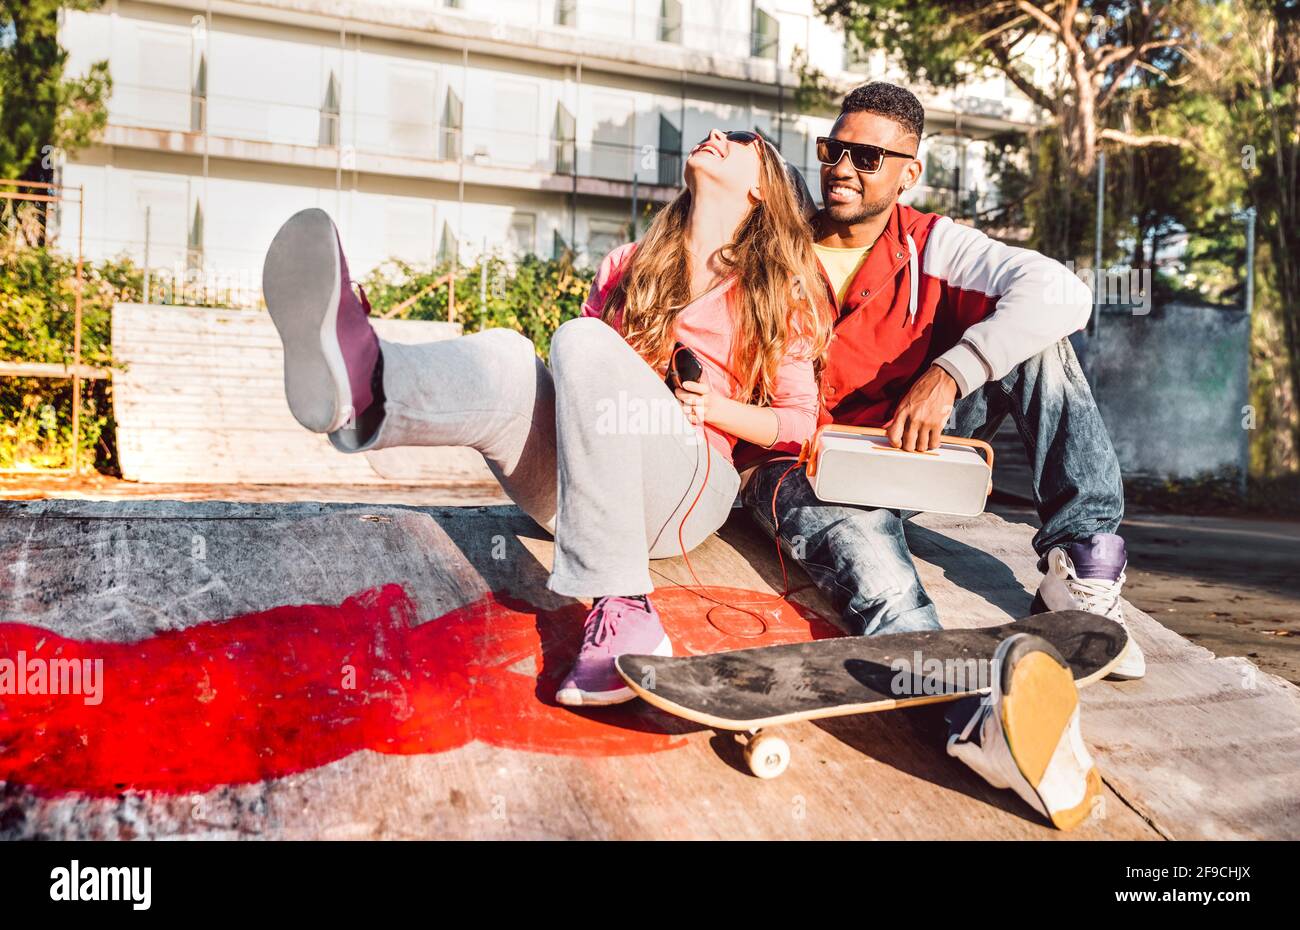 Multiracial couple having fun together at skate park with music boombox - Urban life style concept with genuine people outdoors Stock Photo